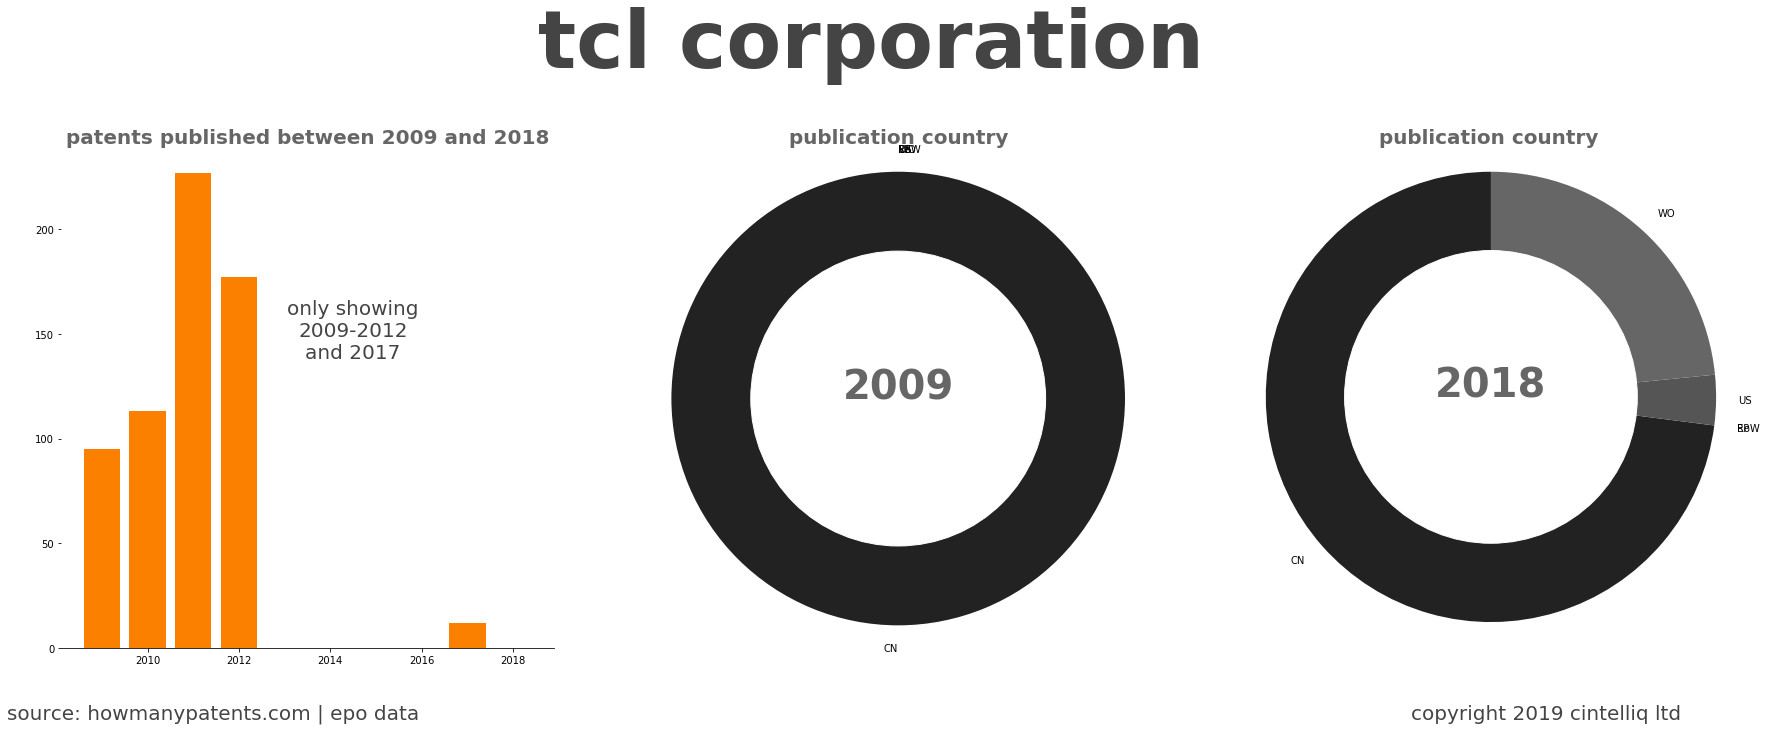 summary of patents for Tcl Corporation